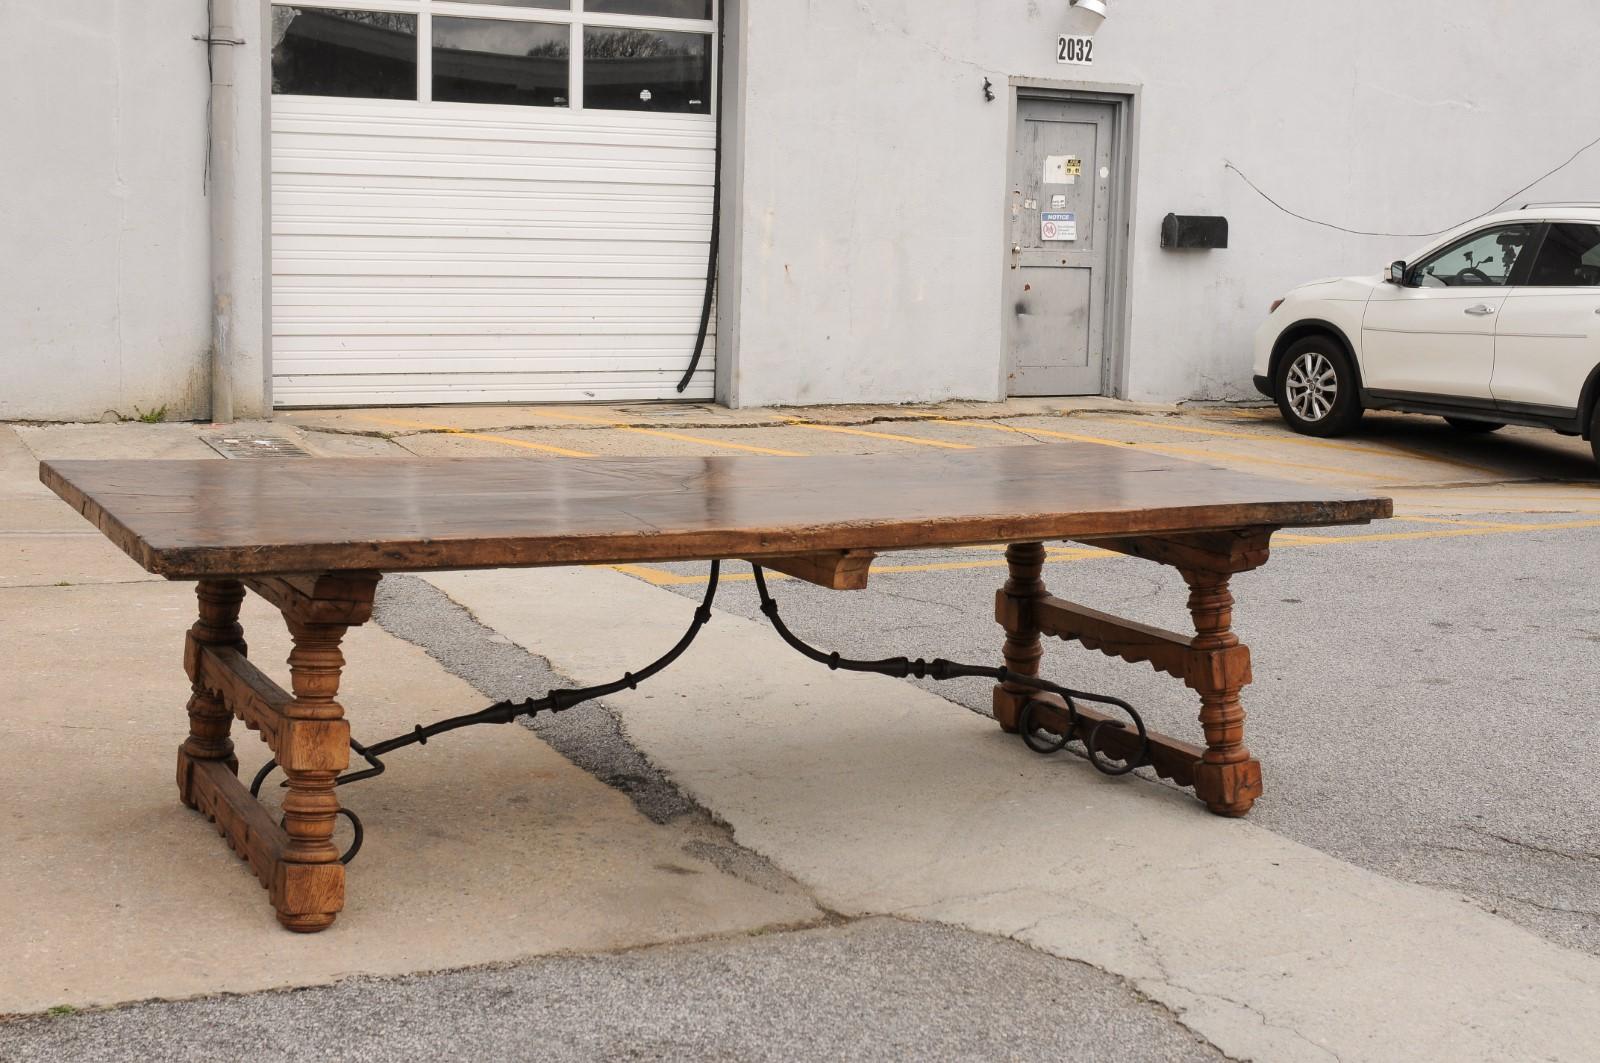 An Italian antique large-sized wooden dining table with forged iron stretcher. This table from Italy was constructed in the early 20th century, but with older 19th century boards used for the top- which are nice and solid at 2.25